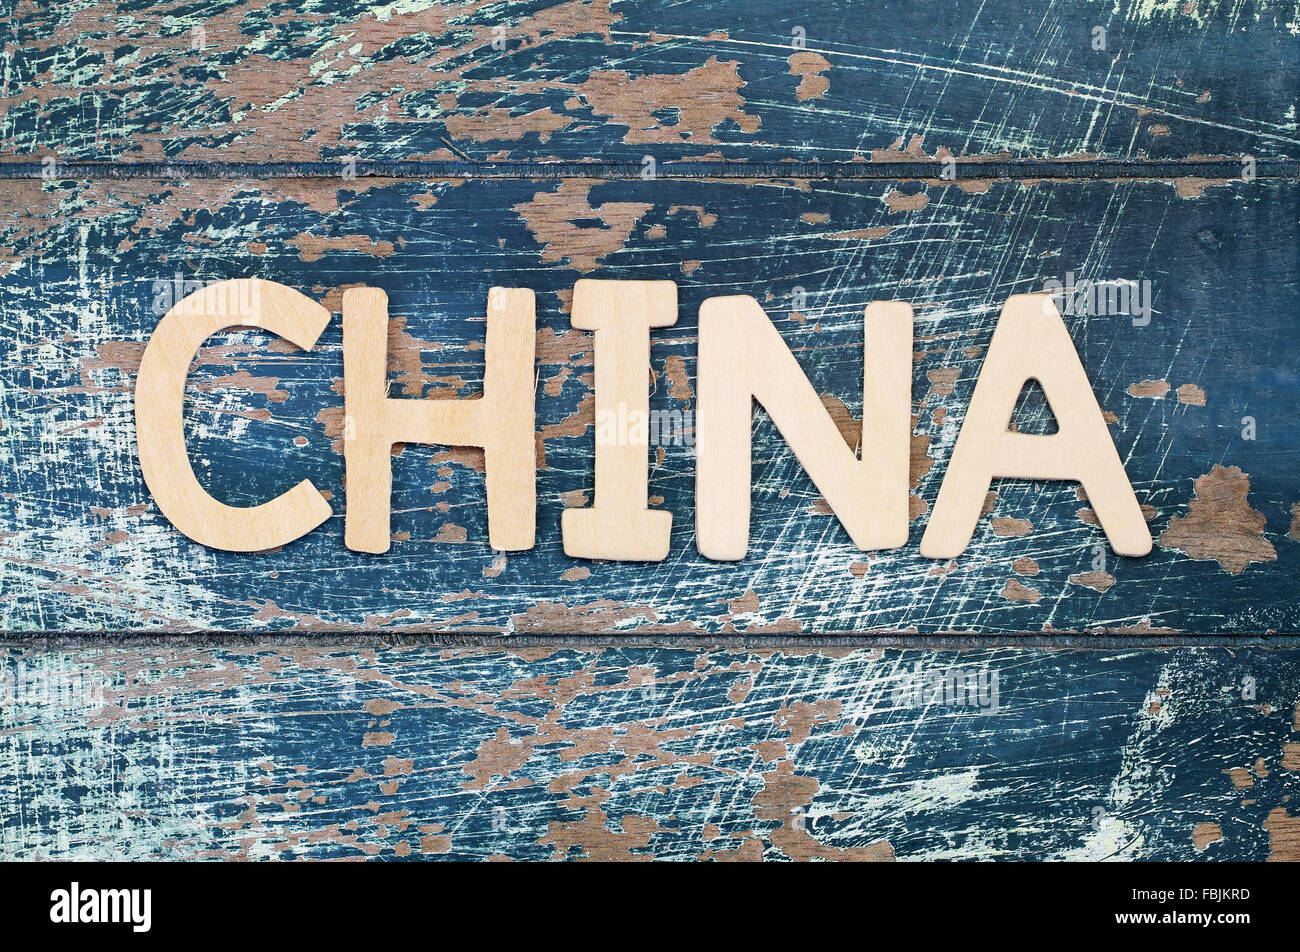 China written with wooden letters on rustic surface Stock Photo